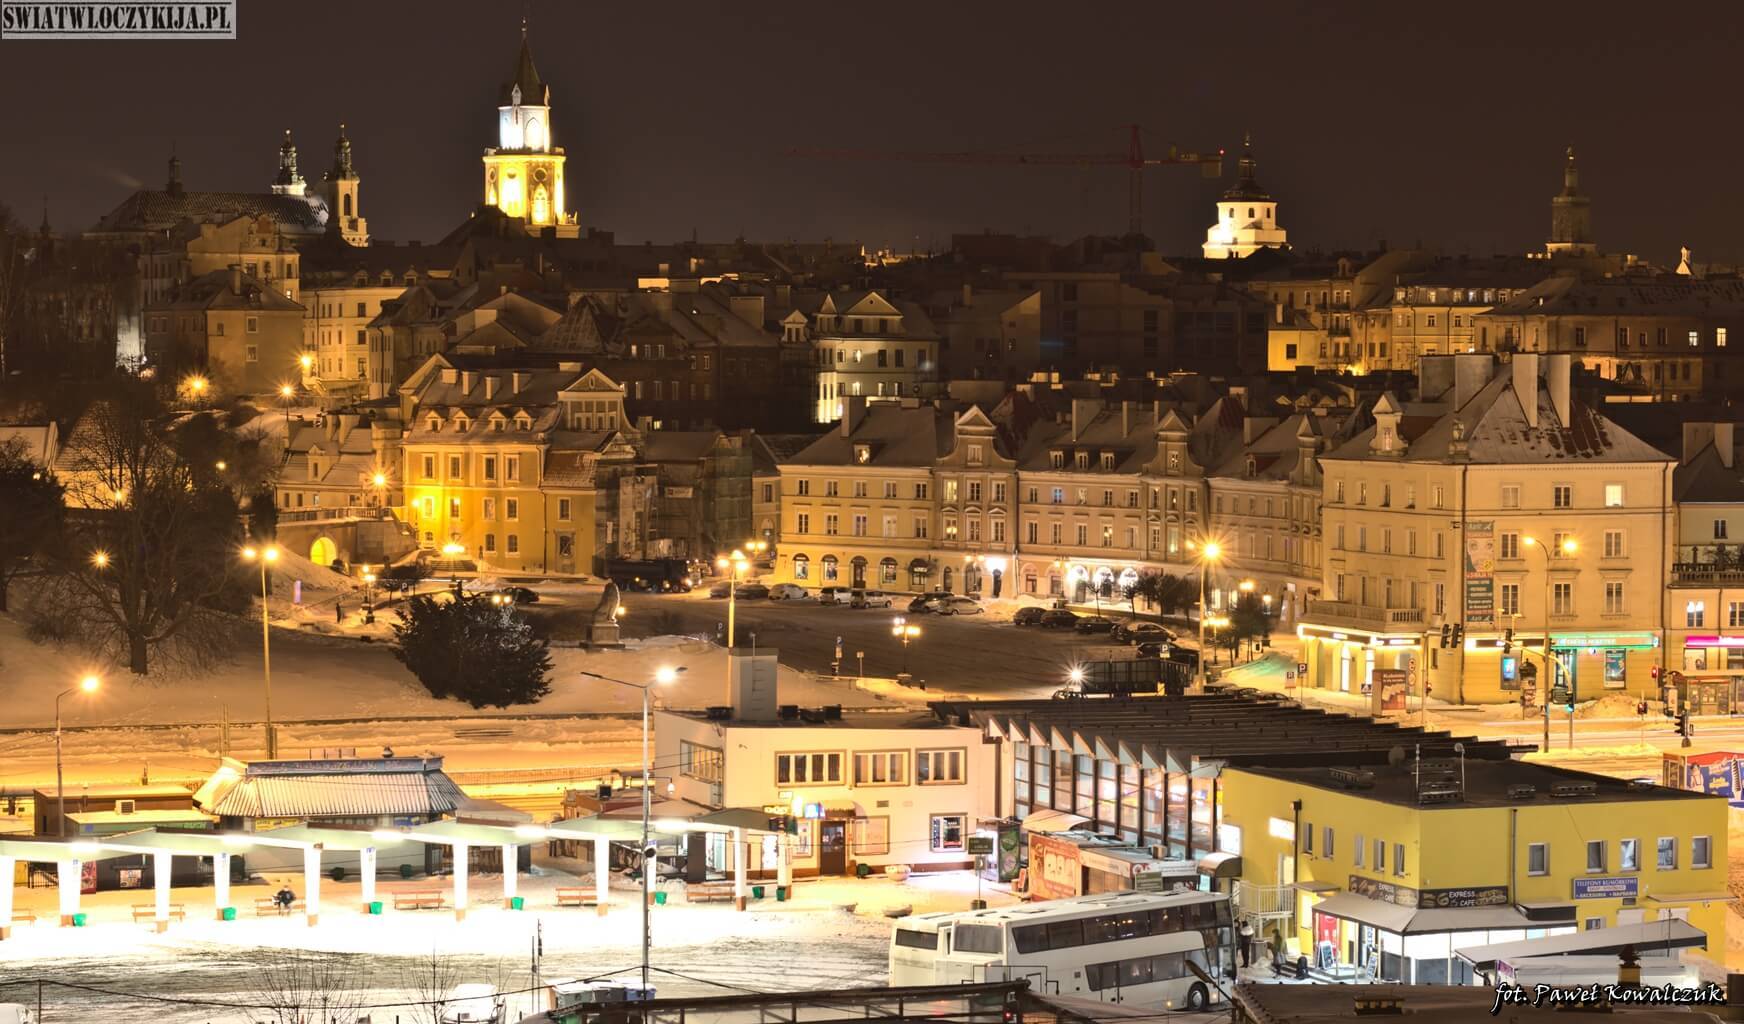 Lublin bus station against the background of the old town in winter night